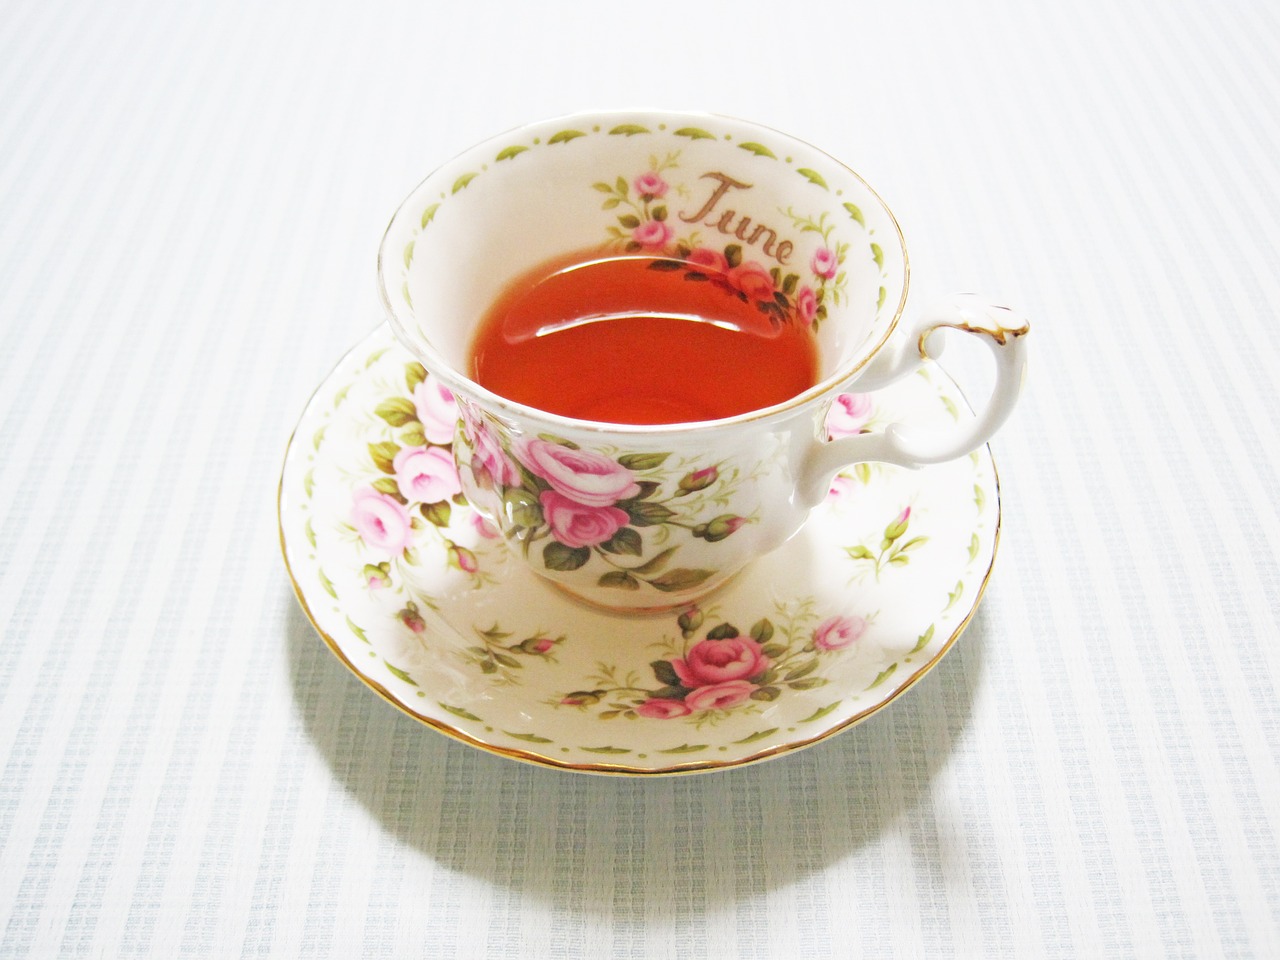 tea time cup june free photo